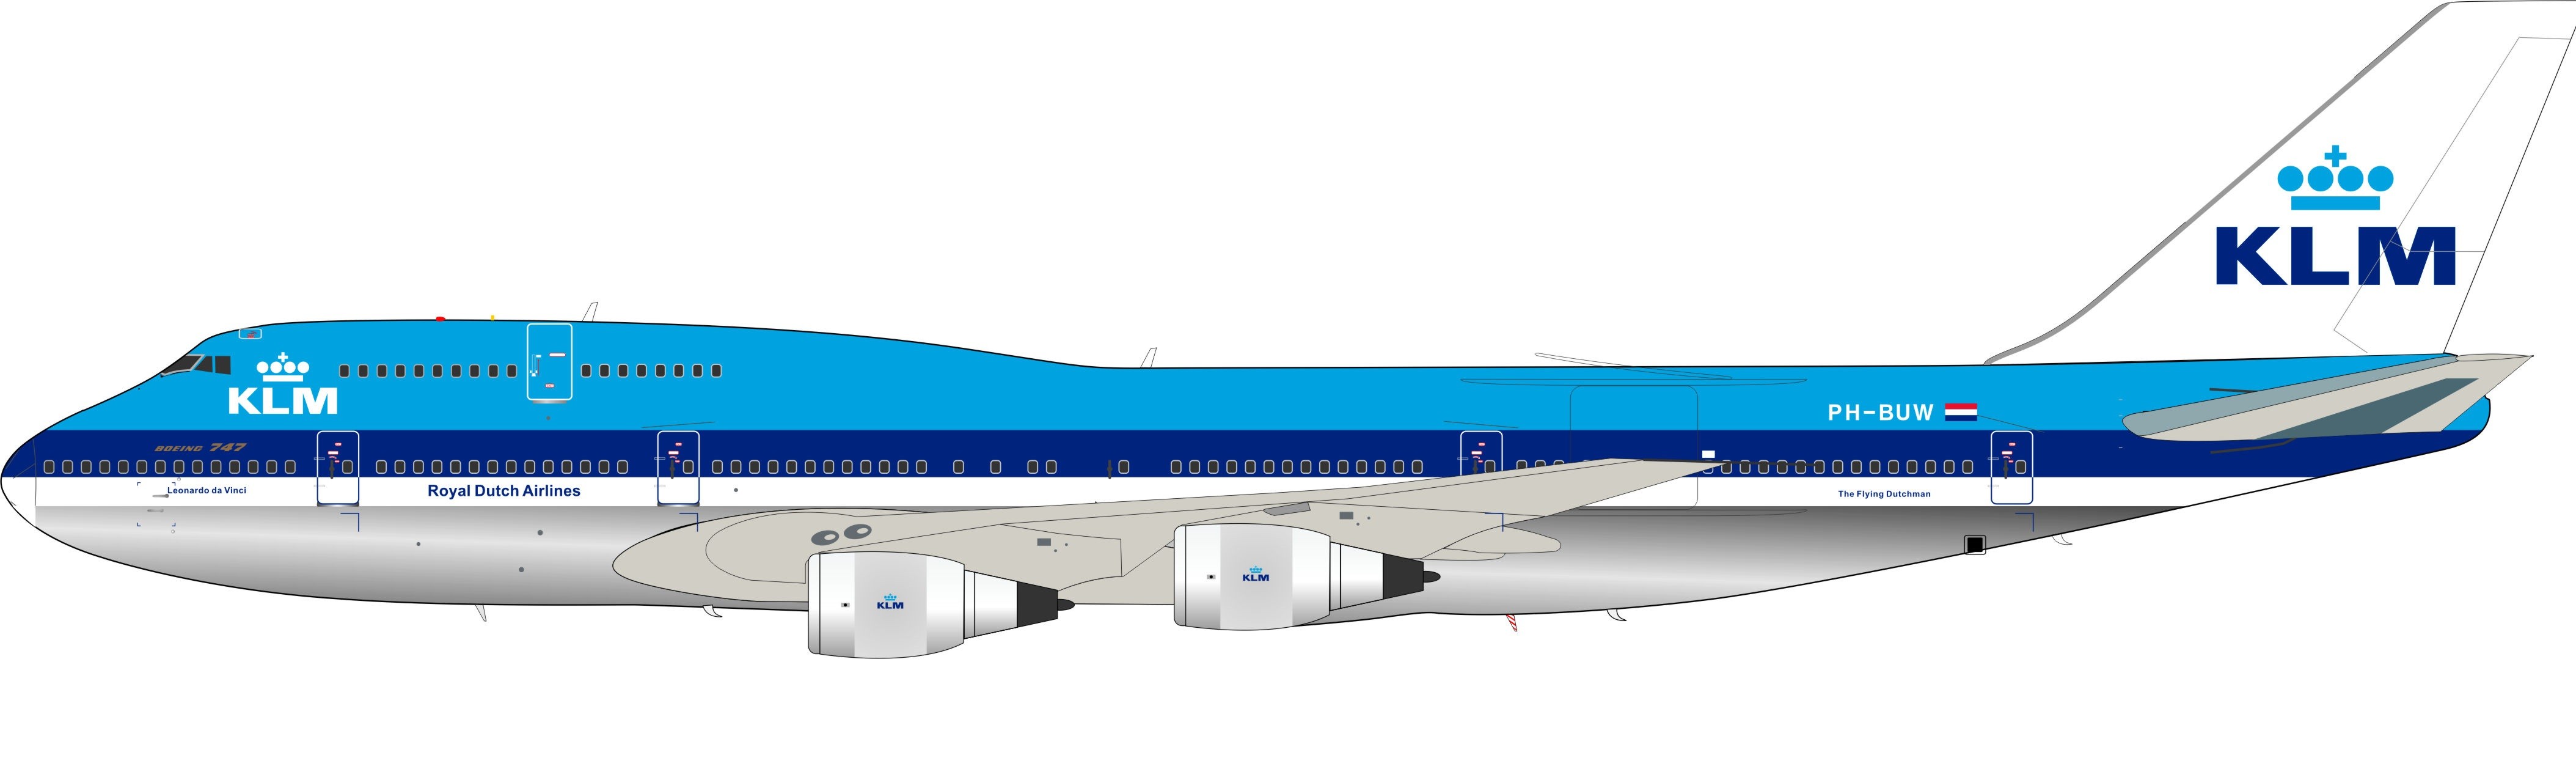 Busyflies 1:300 Scale KLM Dutch Royal Boeing 747 Airplane Models Alloy Diecast Airplane Model 